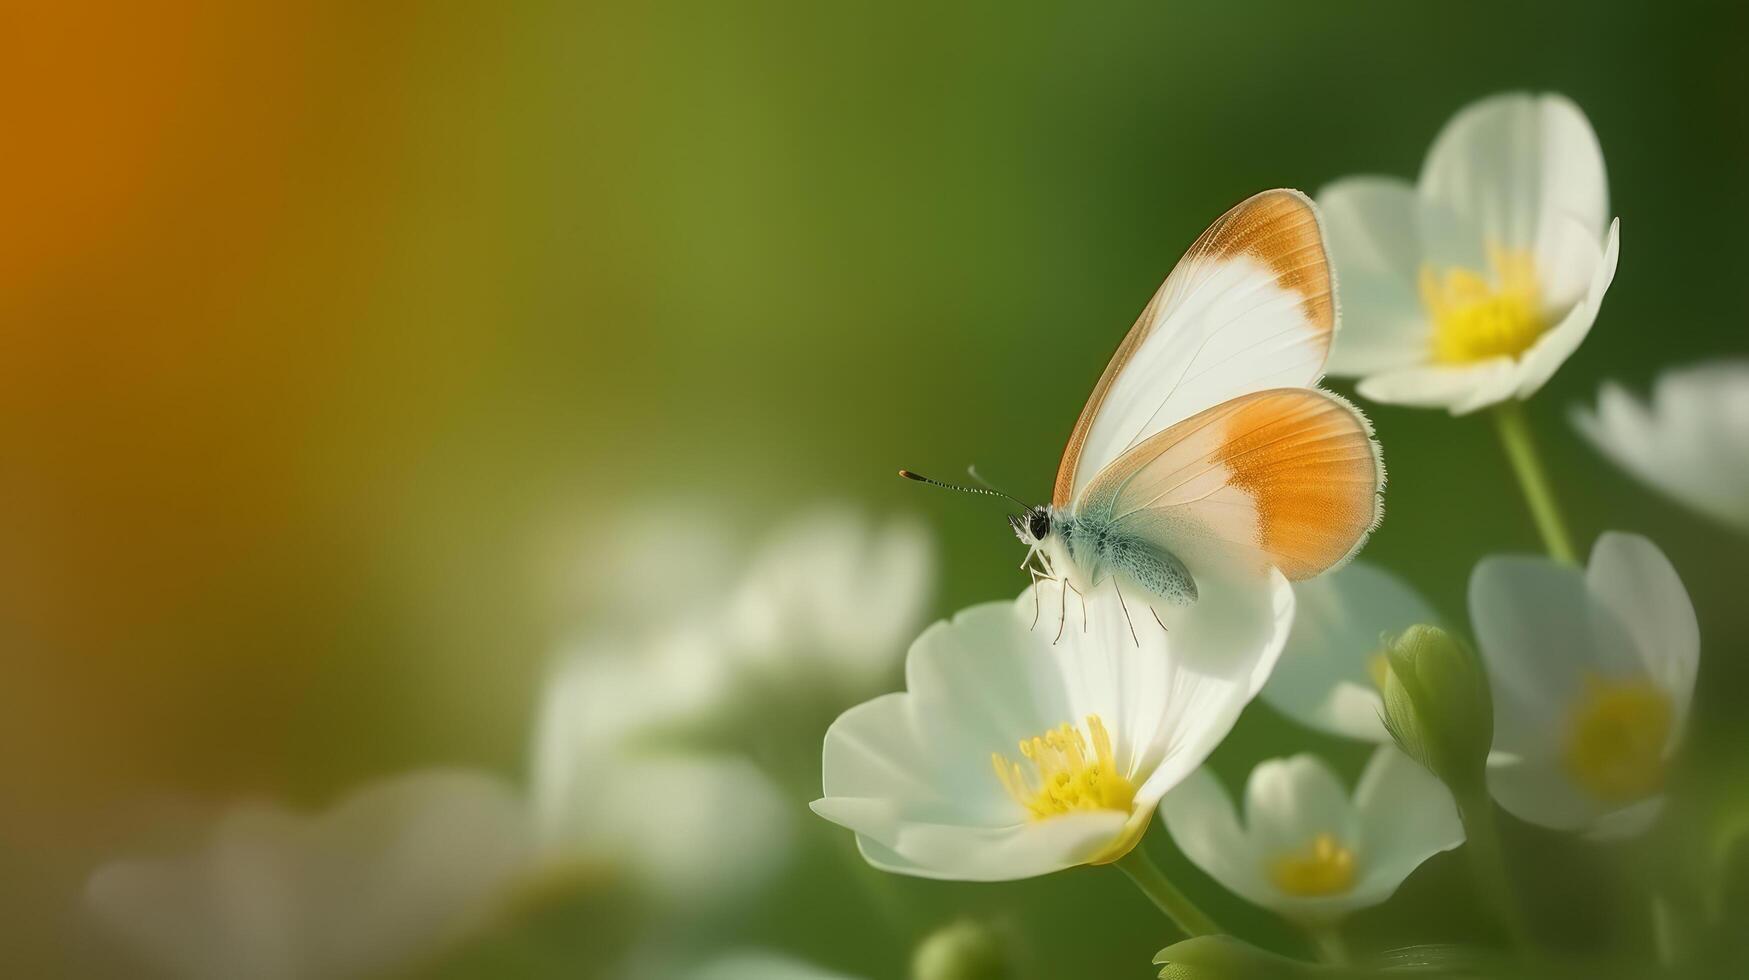 Anemone flower with butterfly. Illustration photo